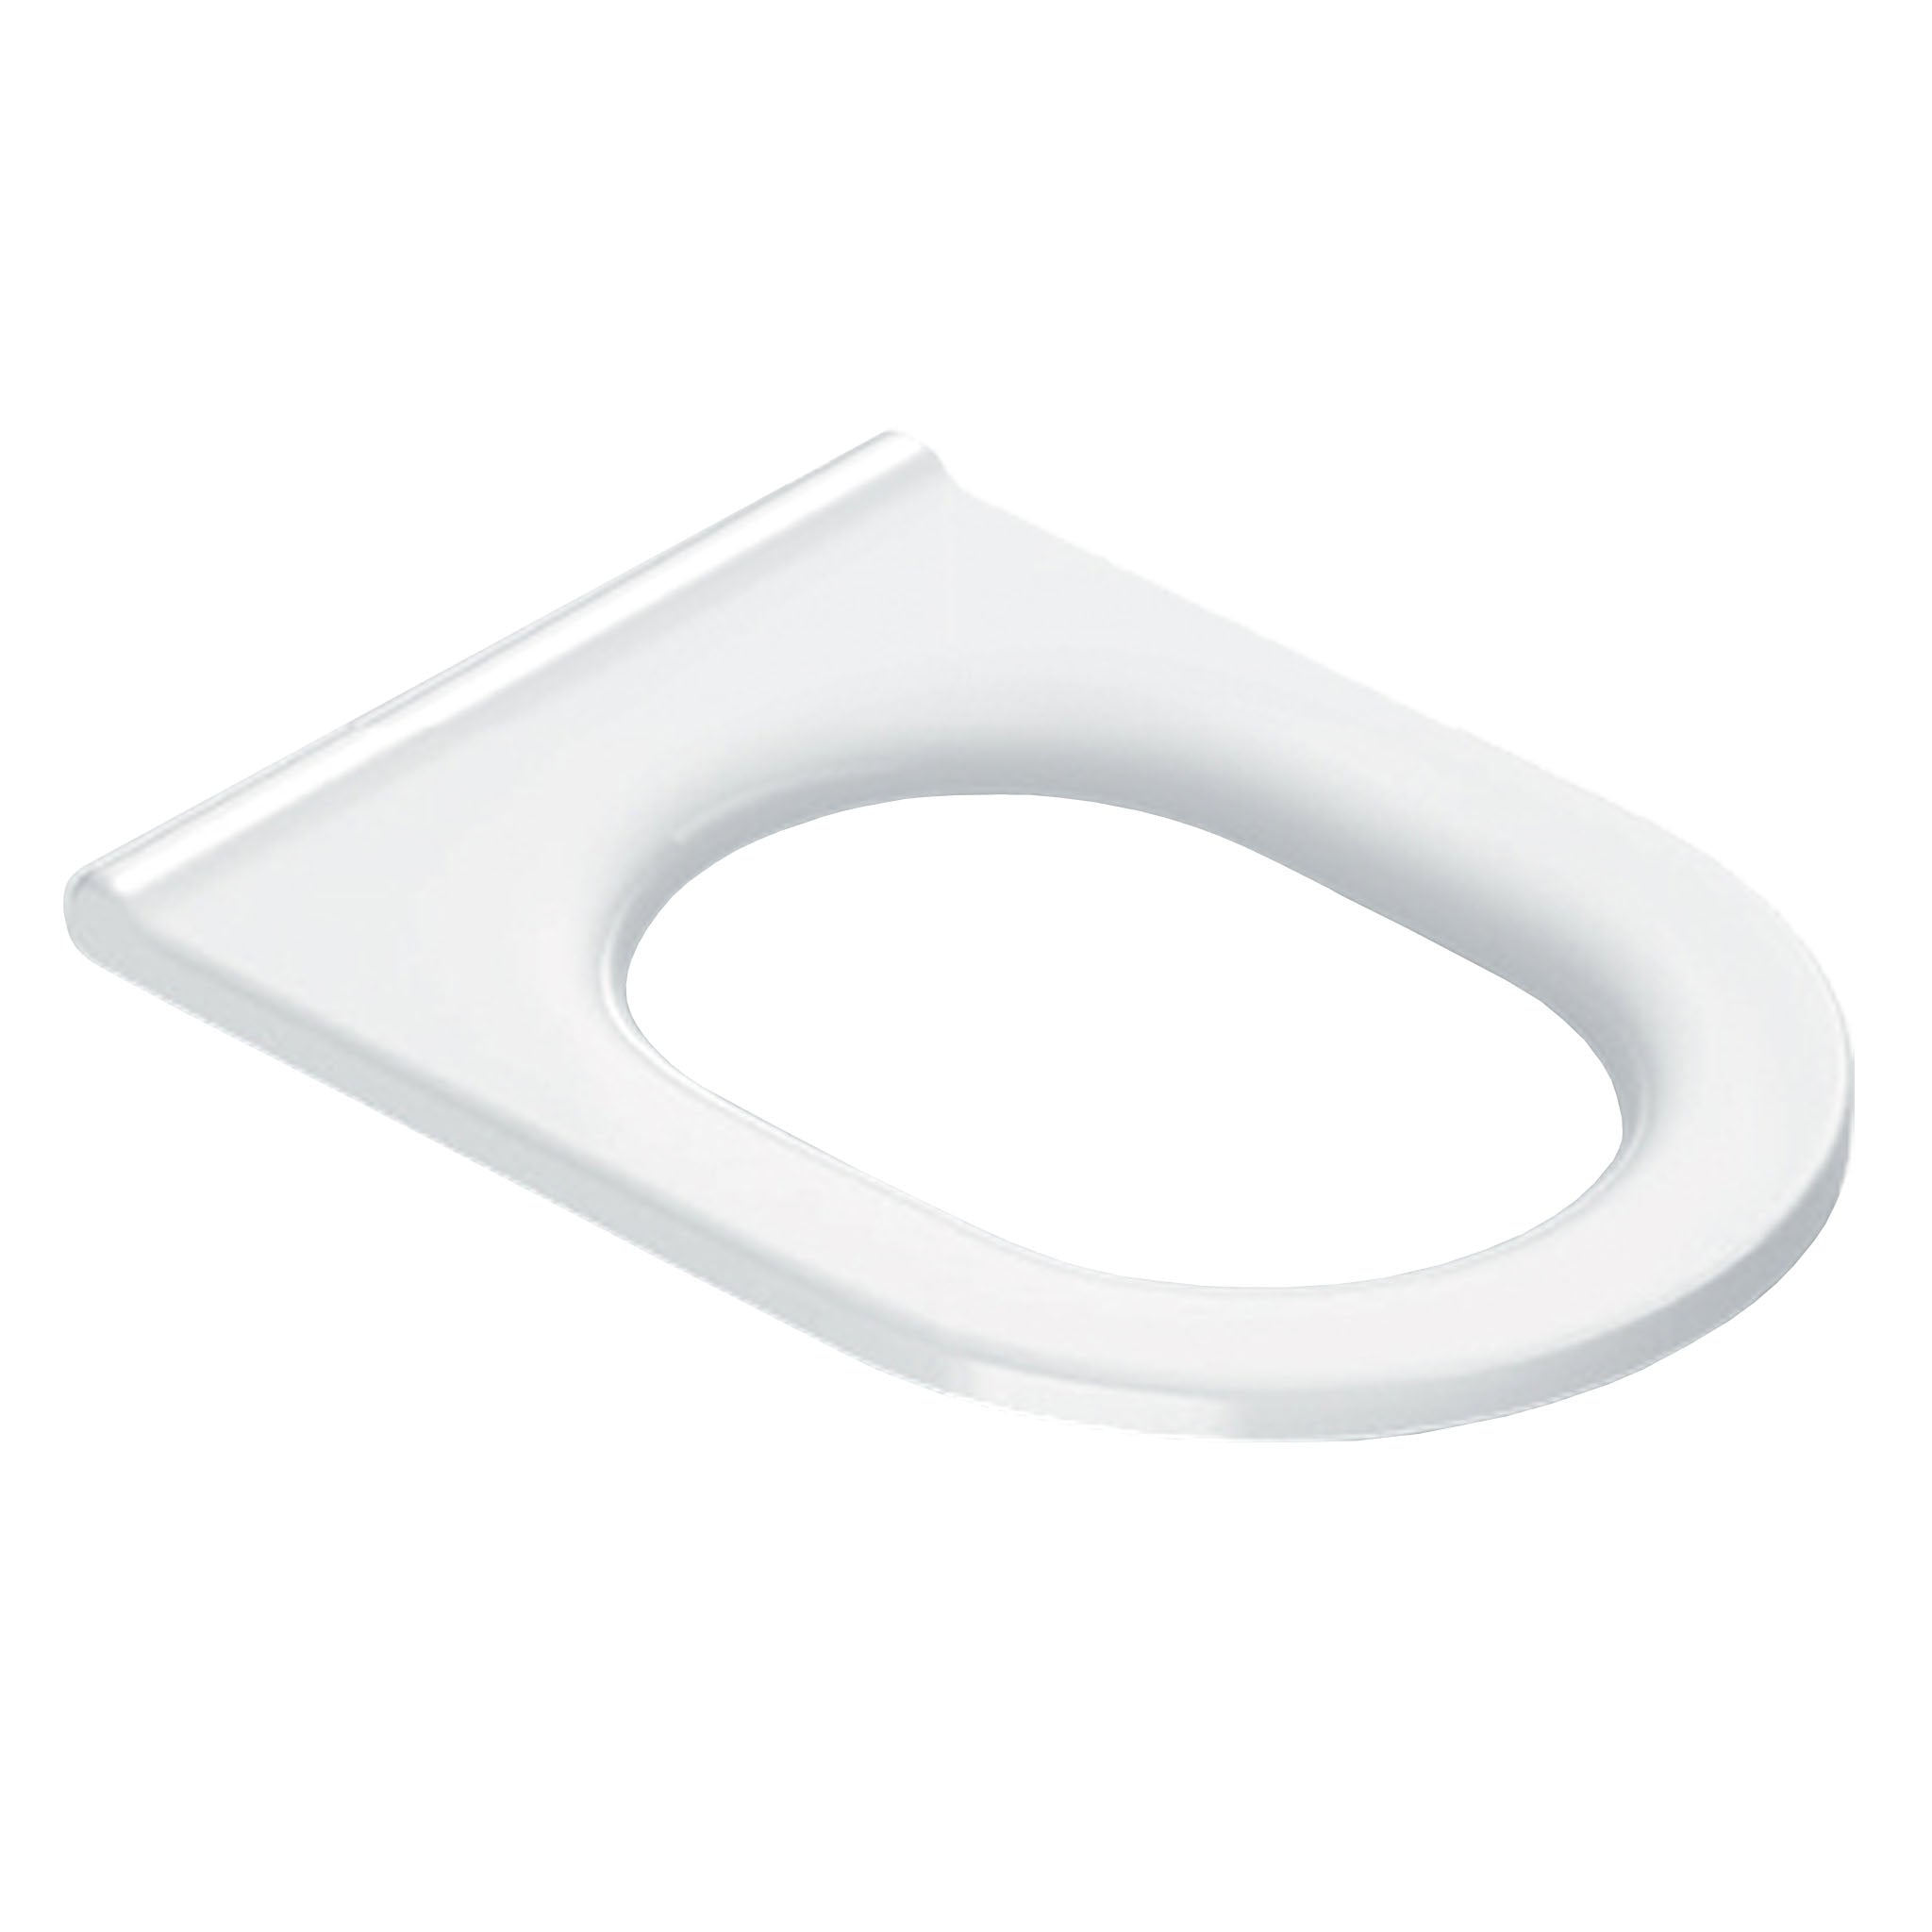 GSI Community Soft Close Toilet Seat Without Cover